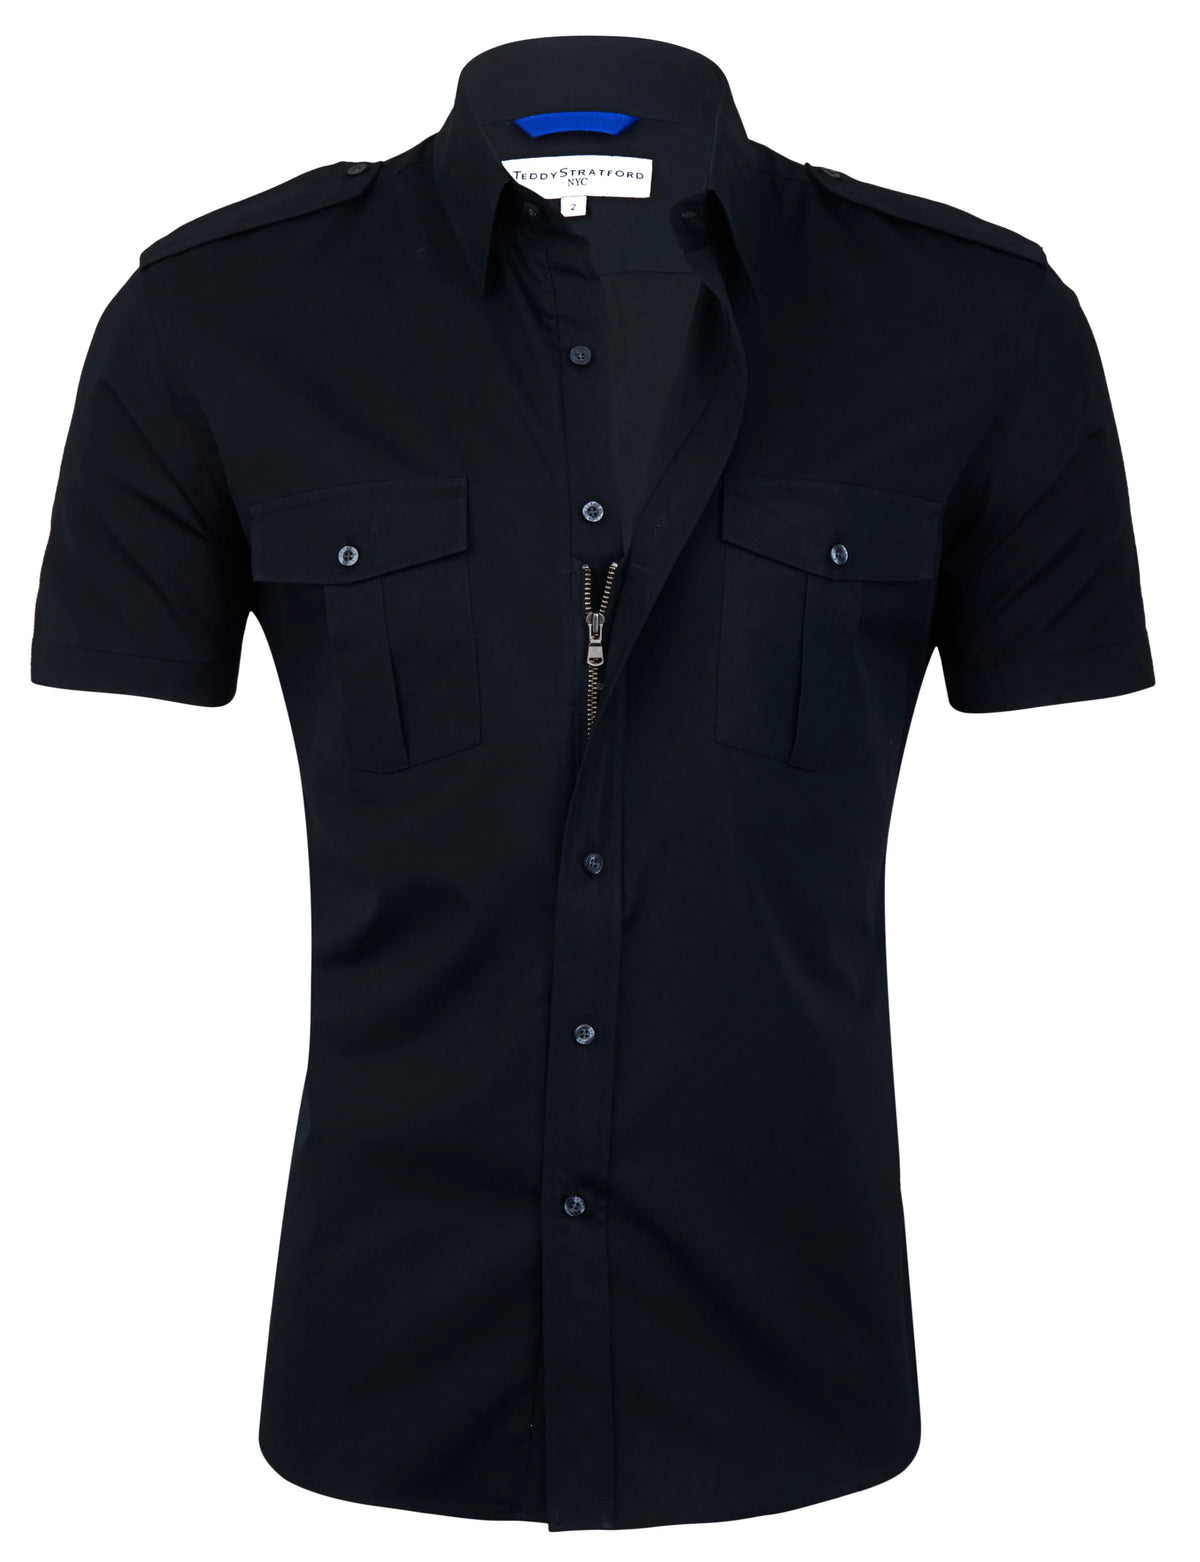 athletic fit button down shirts